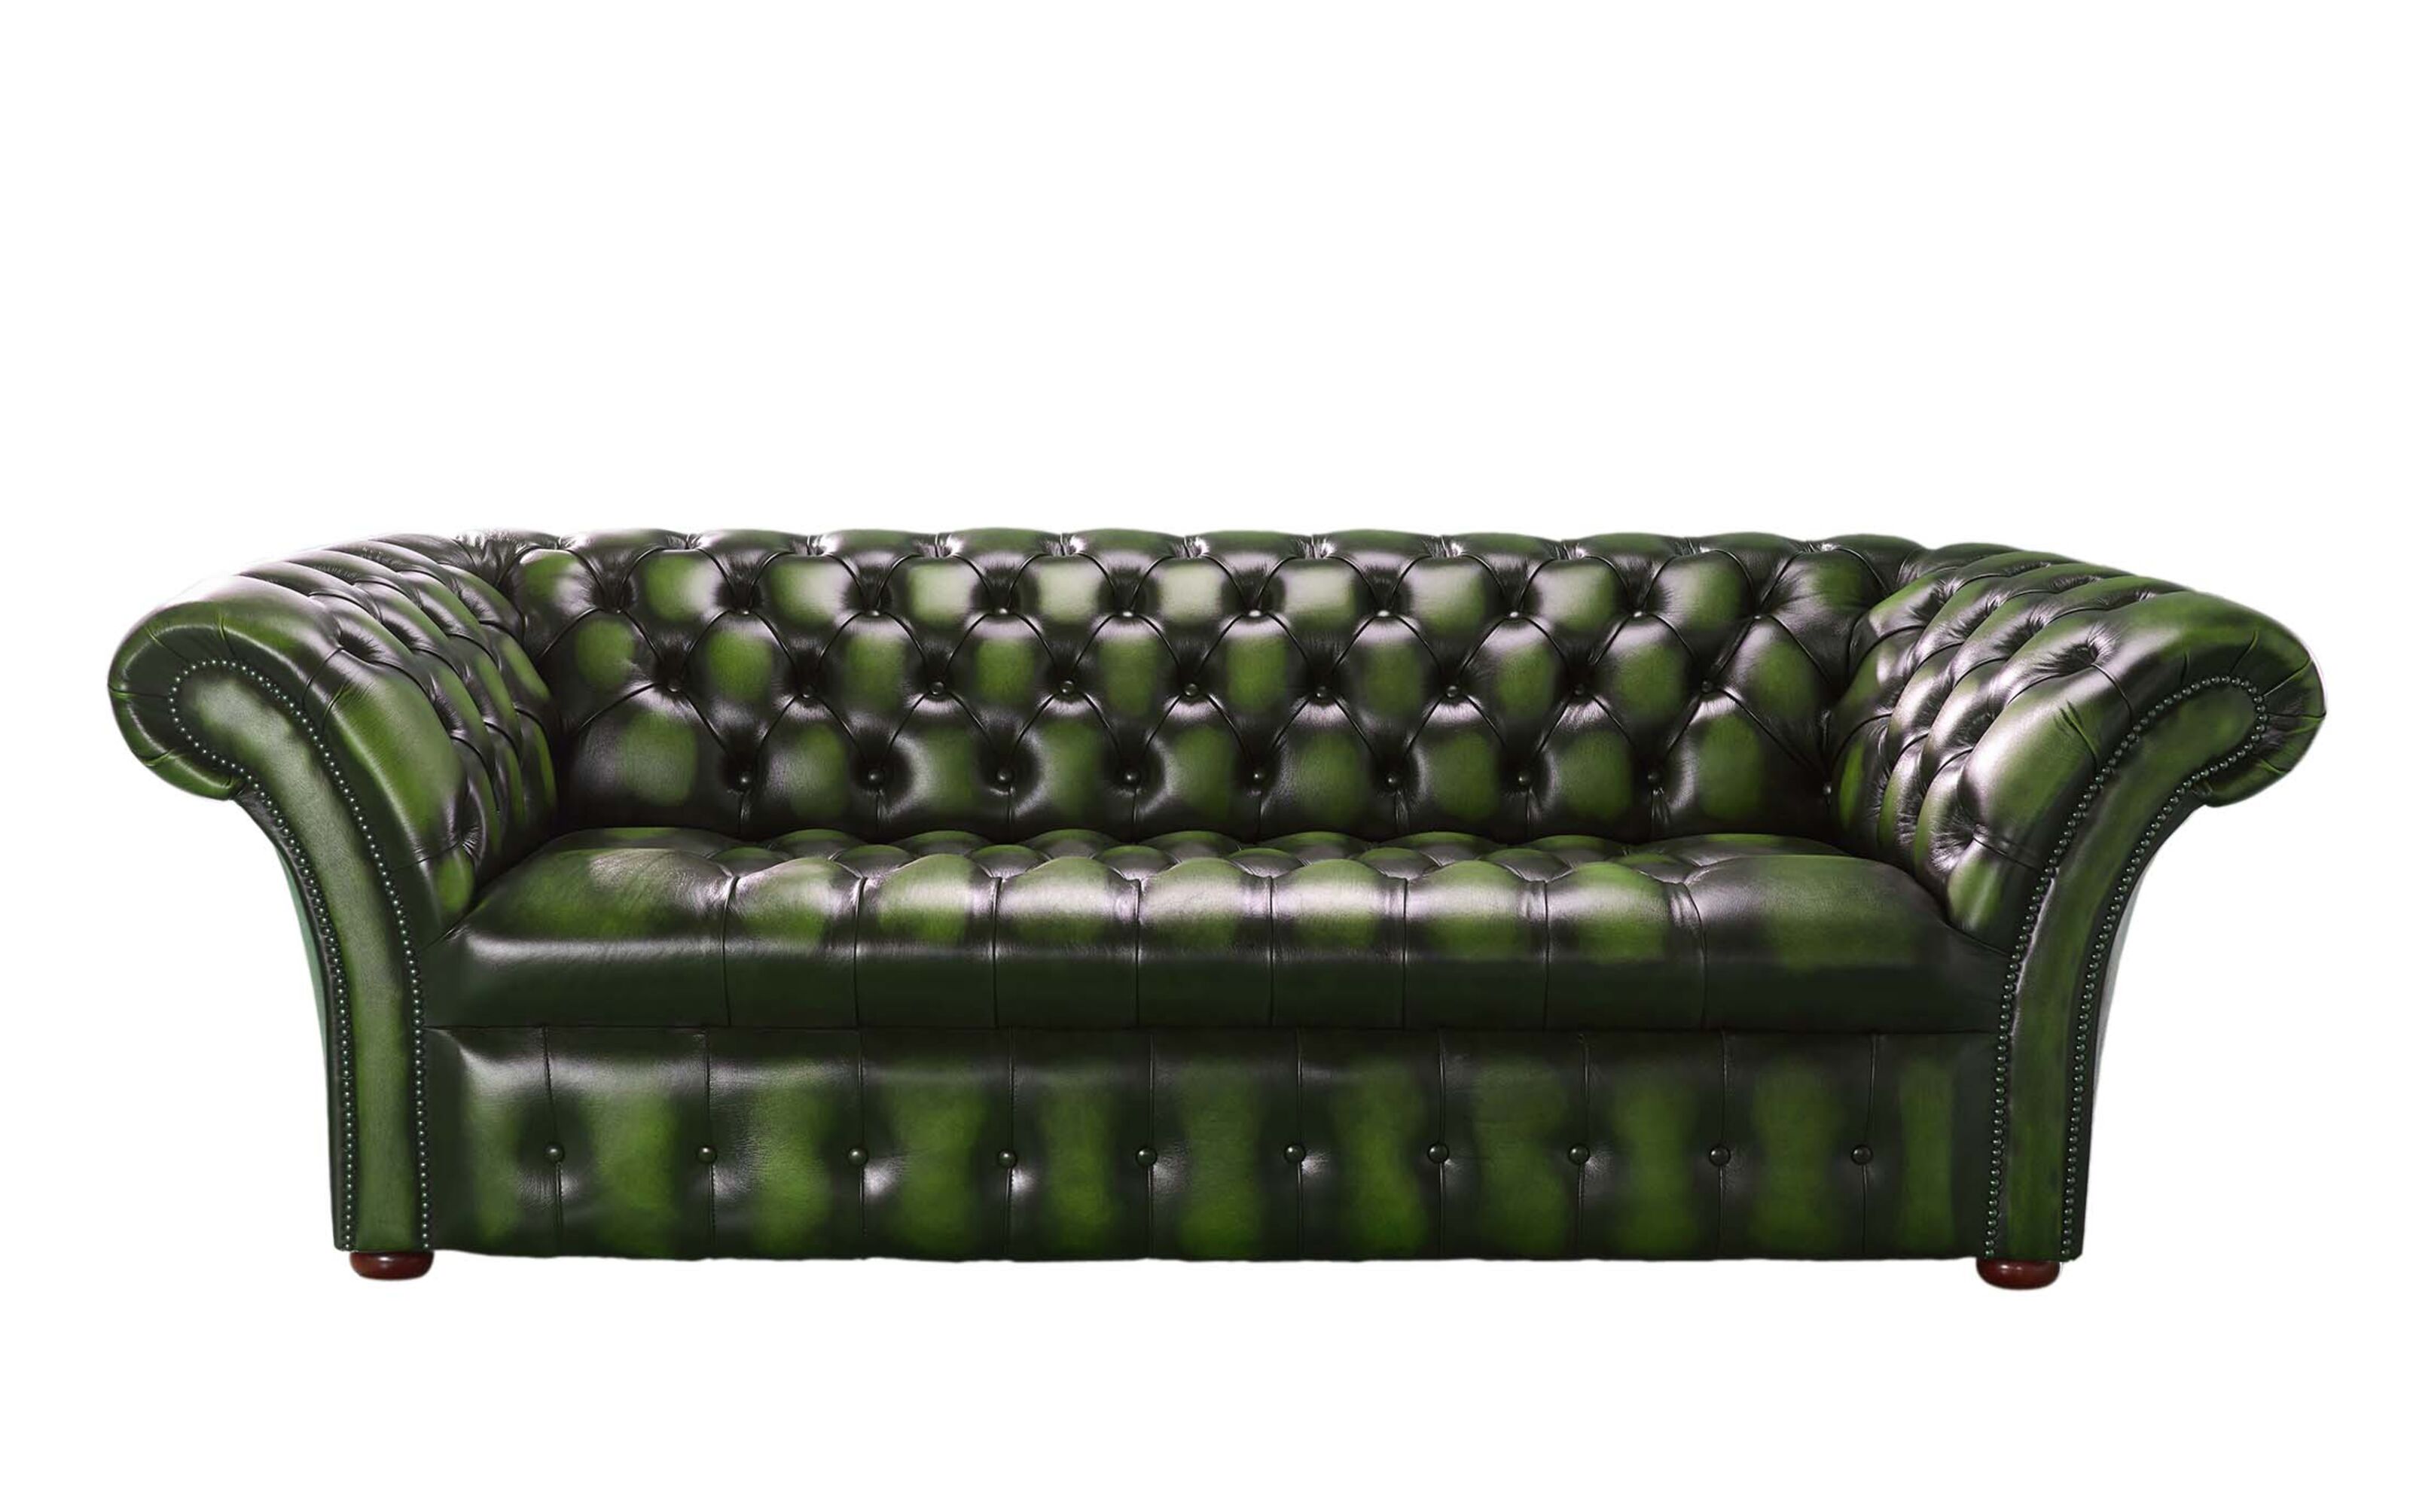 Upgrade Your Room's Comfort with the All-New Chesterfield Sofa Bed  %Post Title